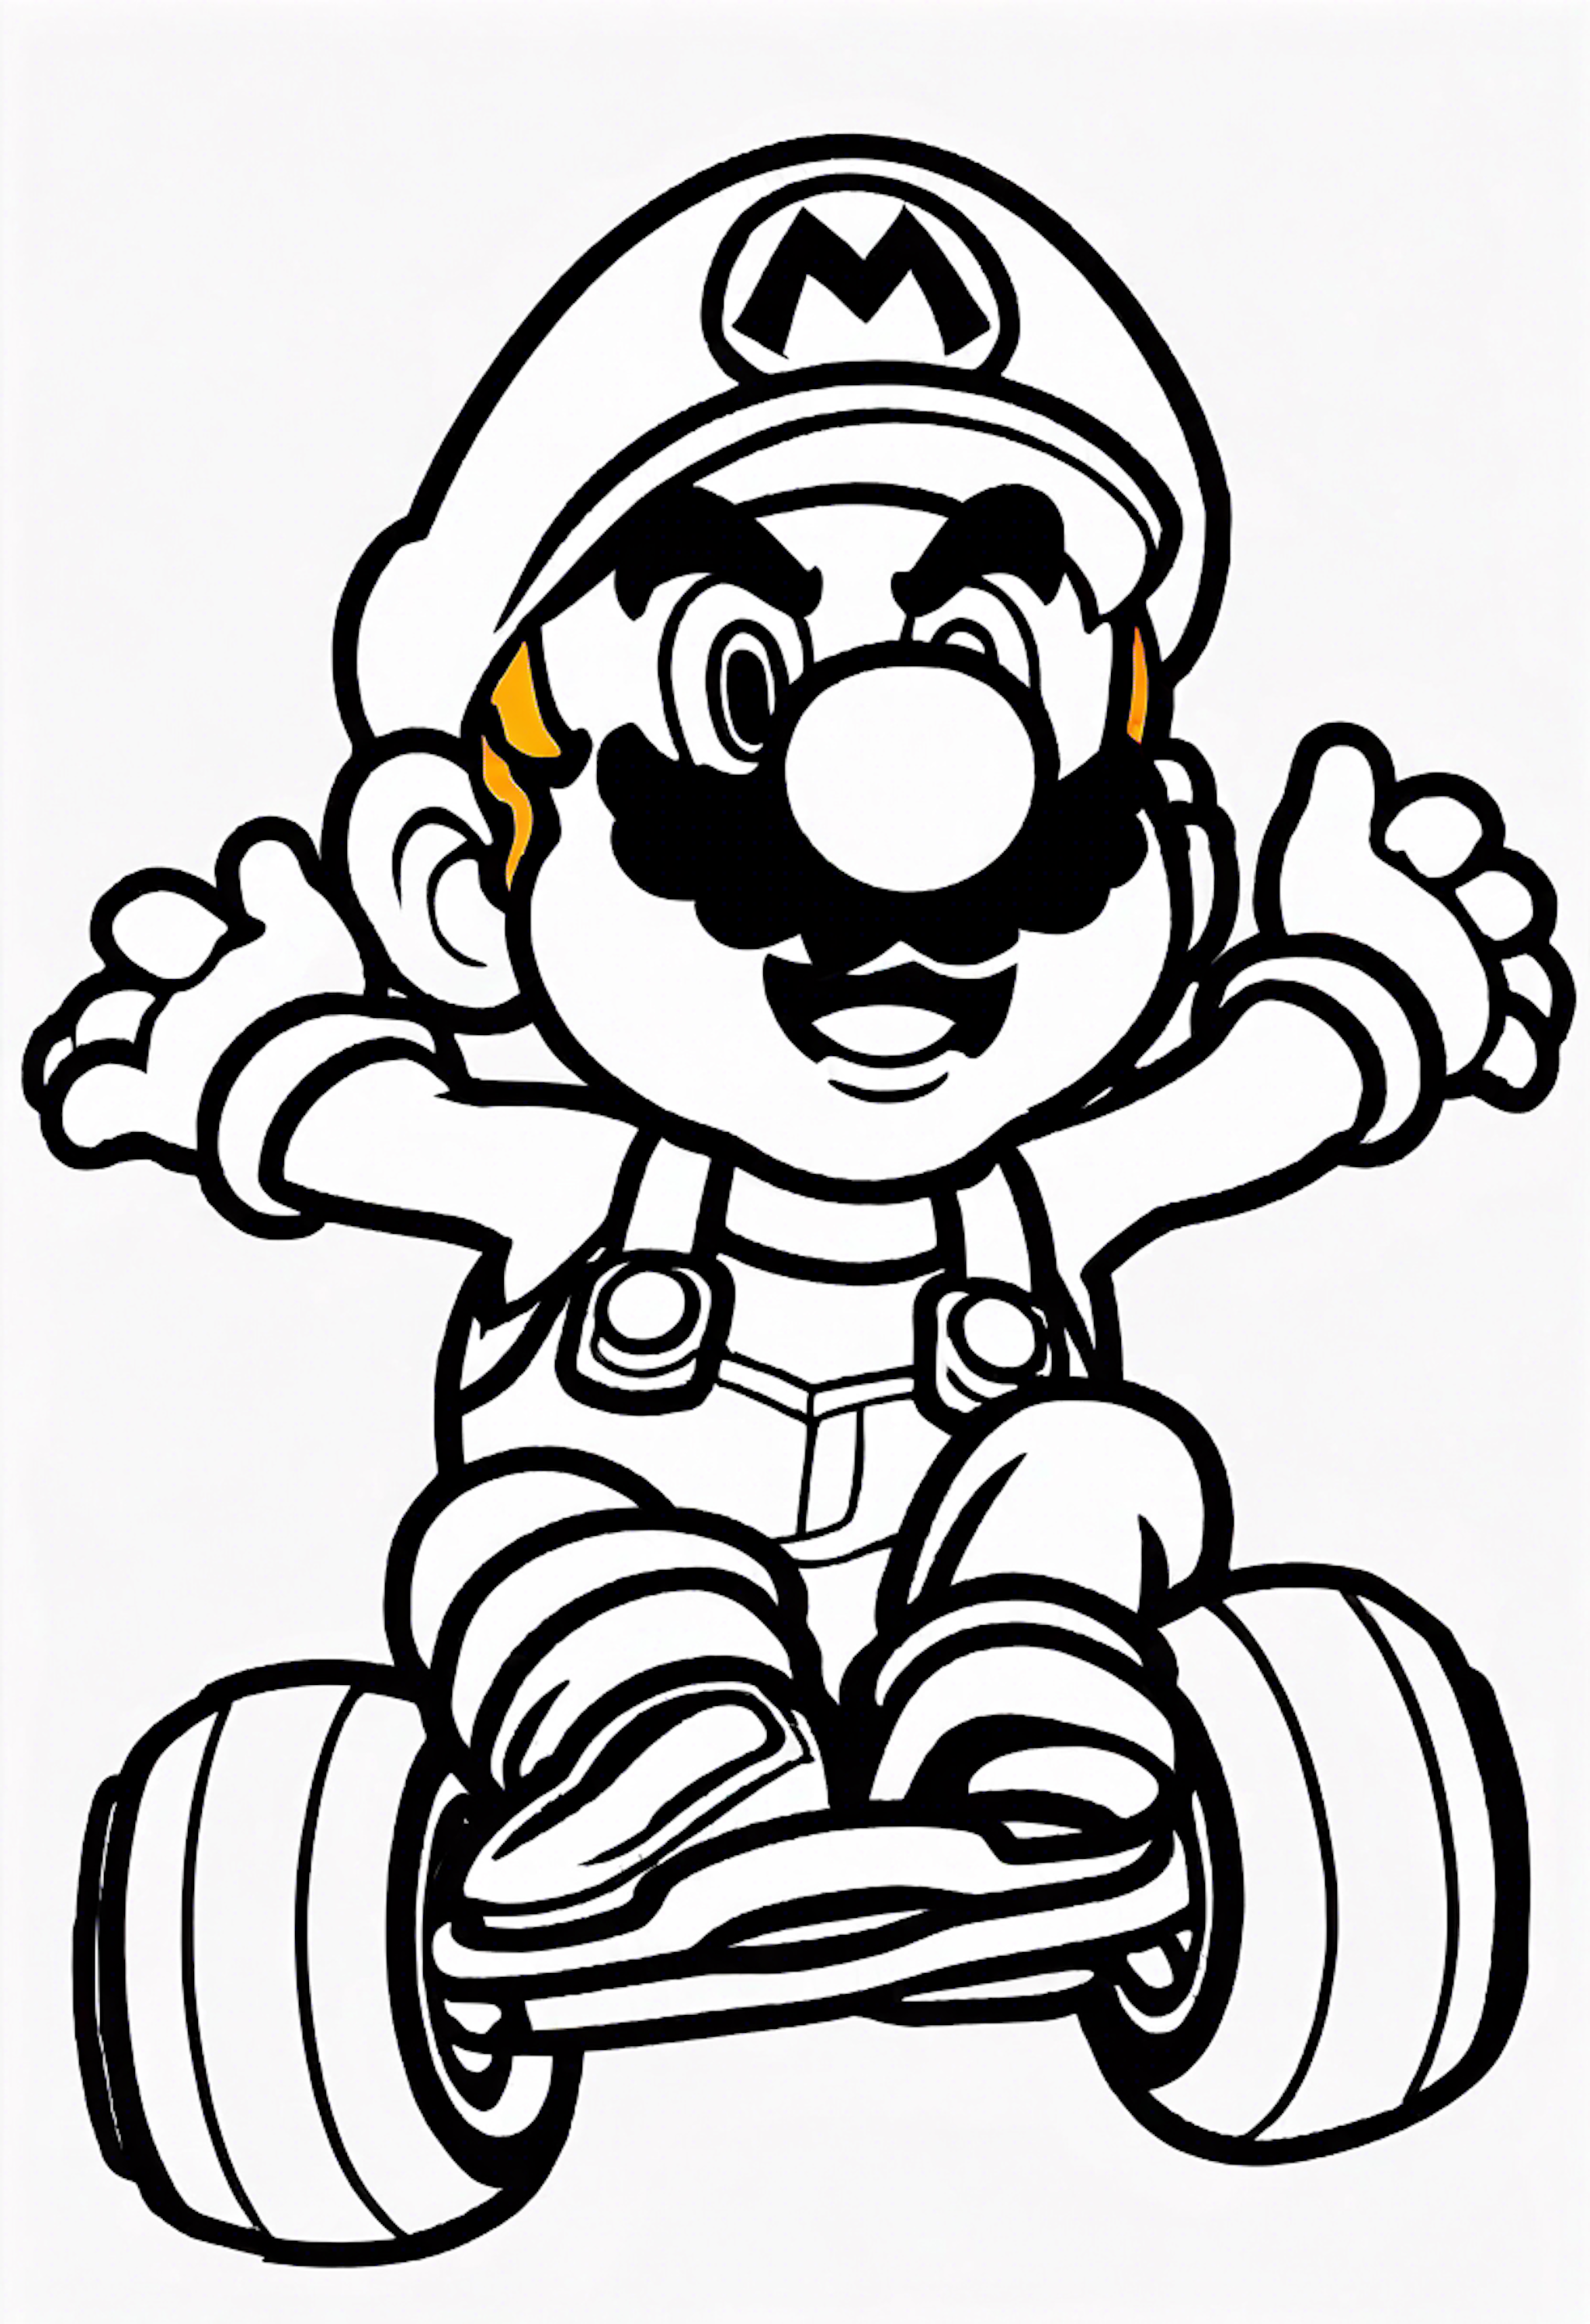 A coloring page for 1 Mario Kart coloring pages